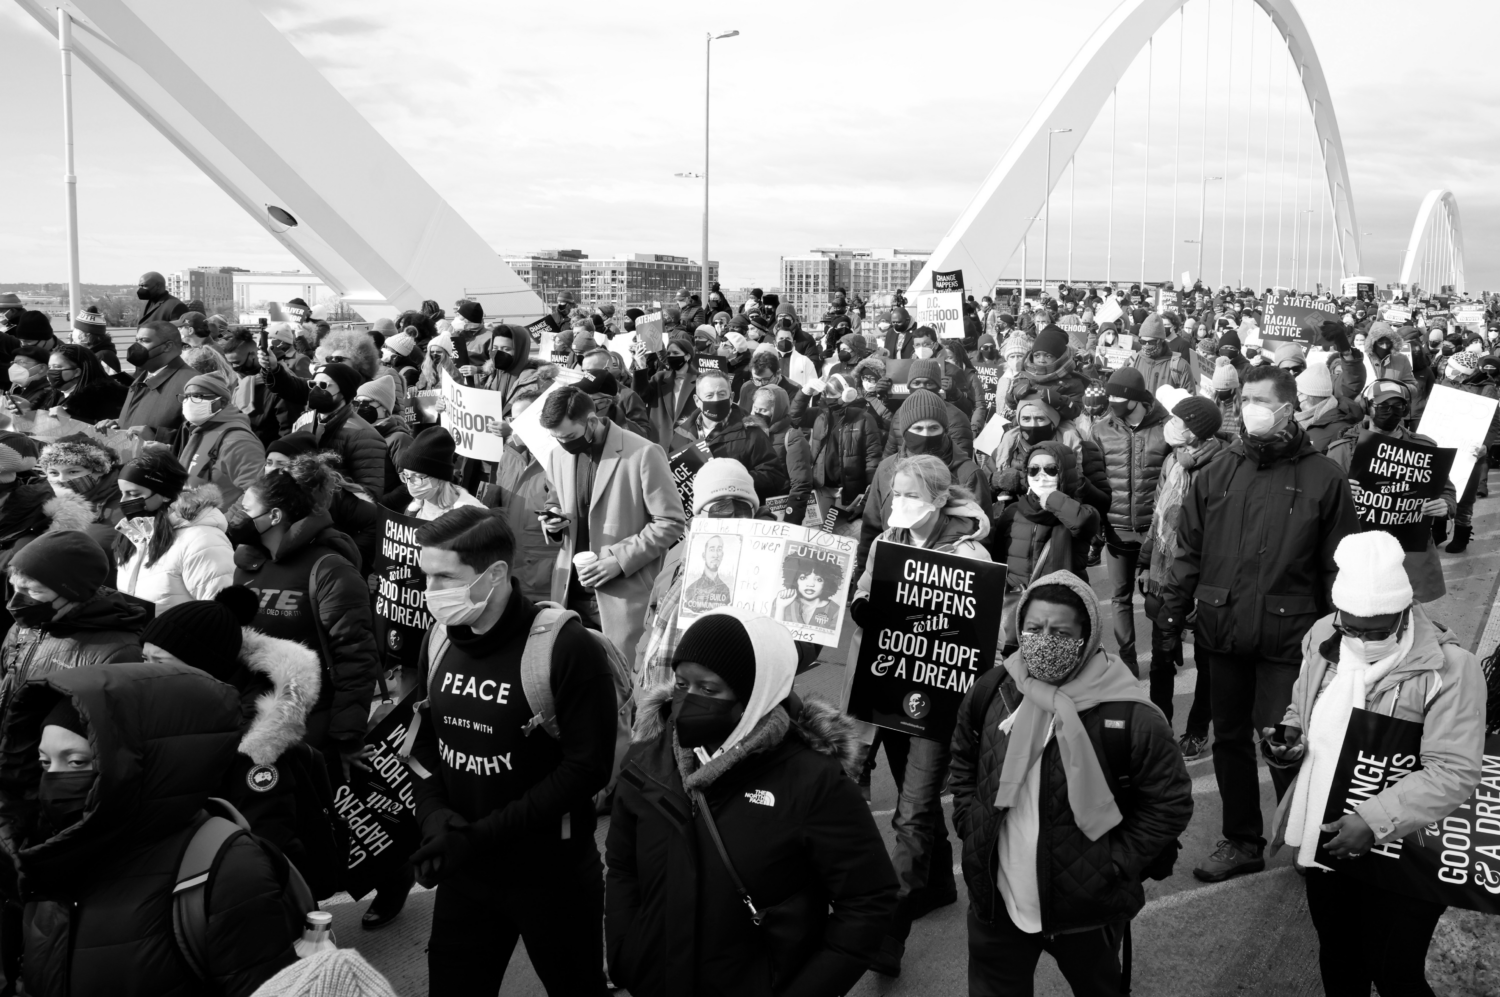 A black and white photo of crowd of people wearing masks and carrying signs reading "Change Happens with Good Hope and a Dream" march across a bridge.